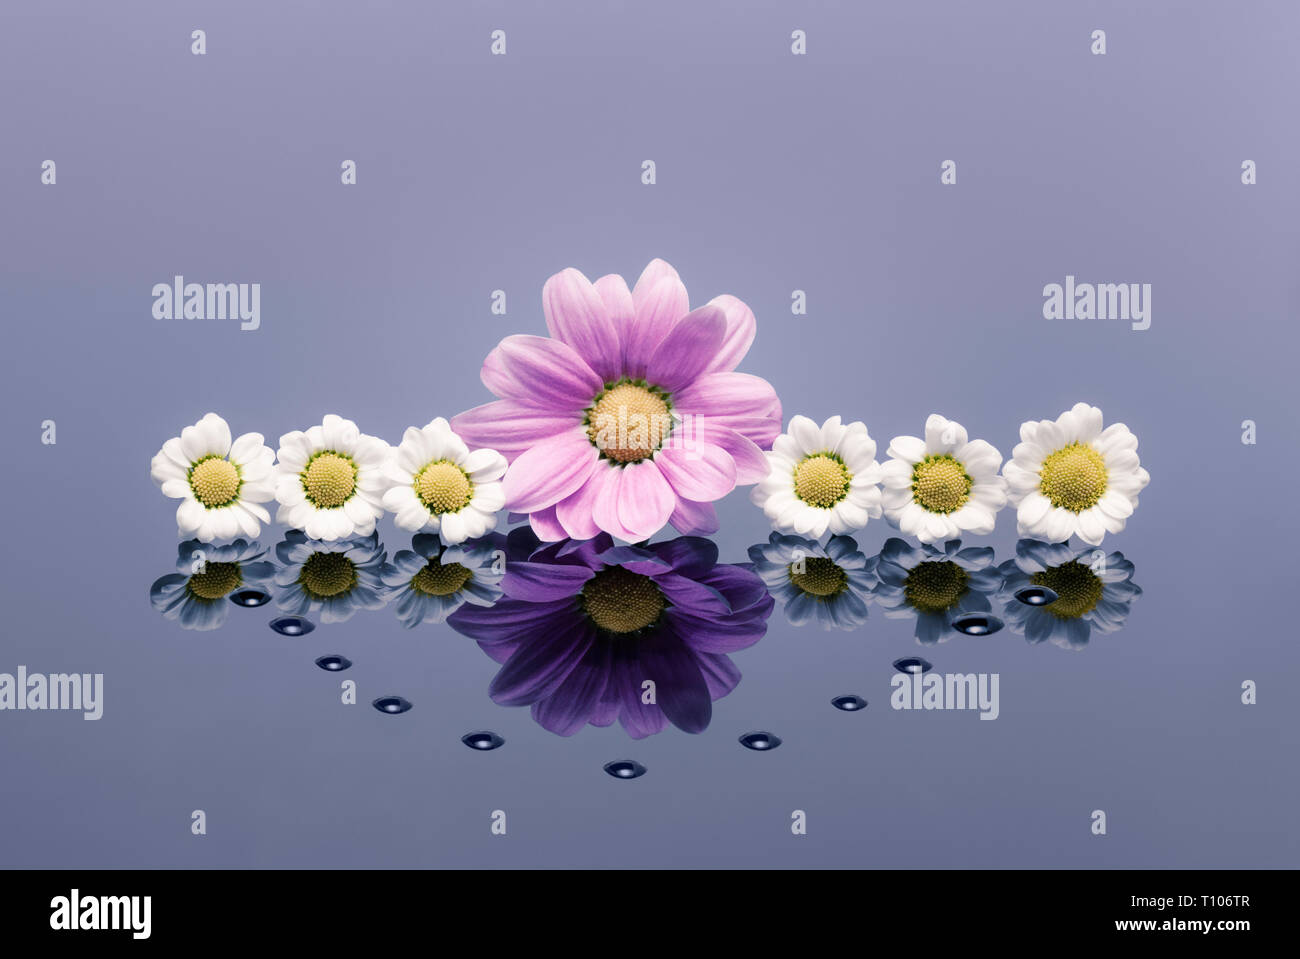 White and pink Chrysanthemums on reflective surface with waterdrops Stock Photo